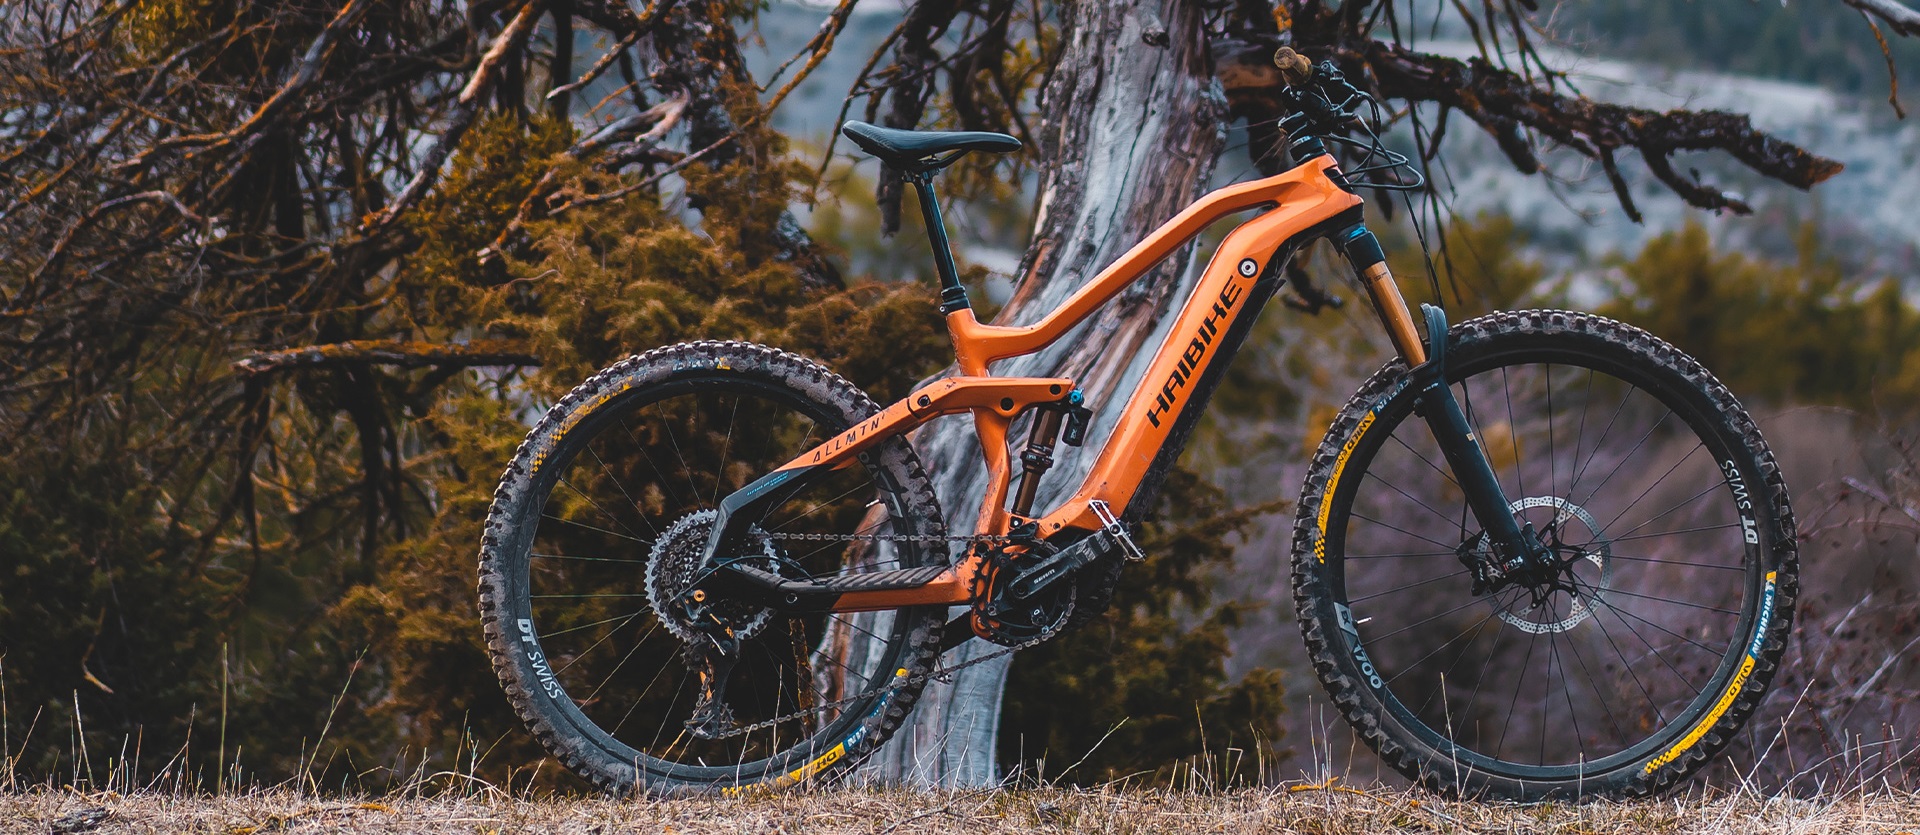 Haibike AllMtn CF 6 eMTB standing in a forest